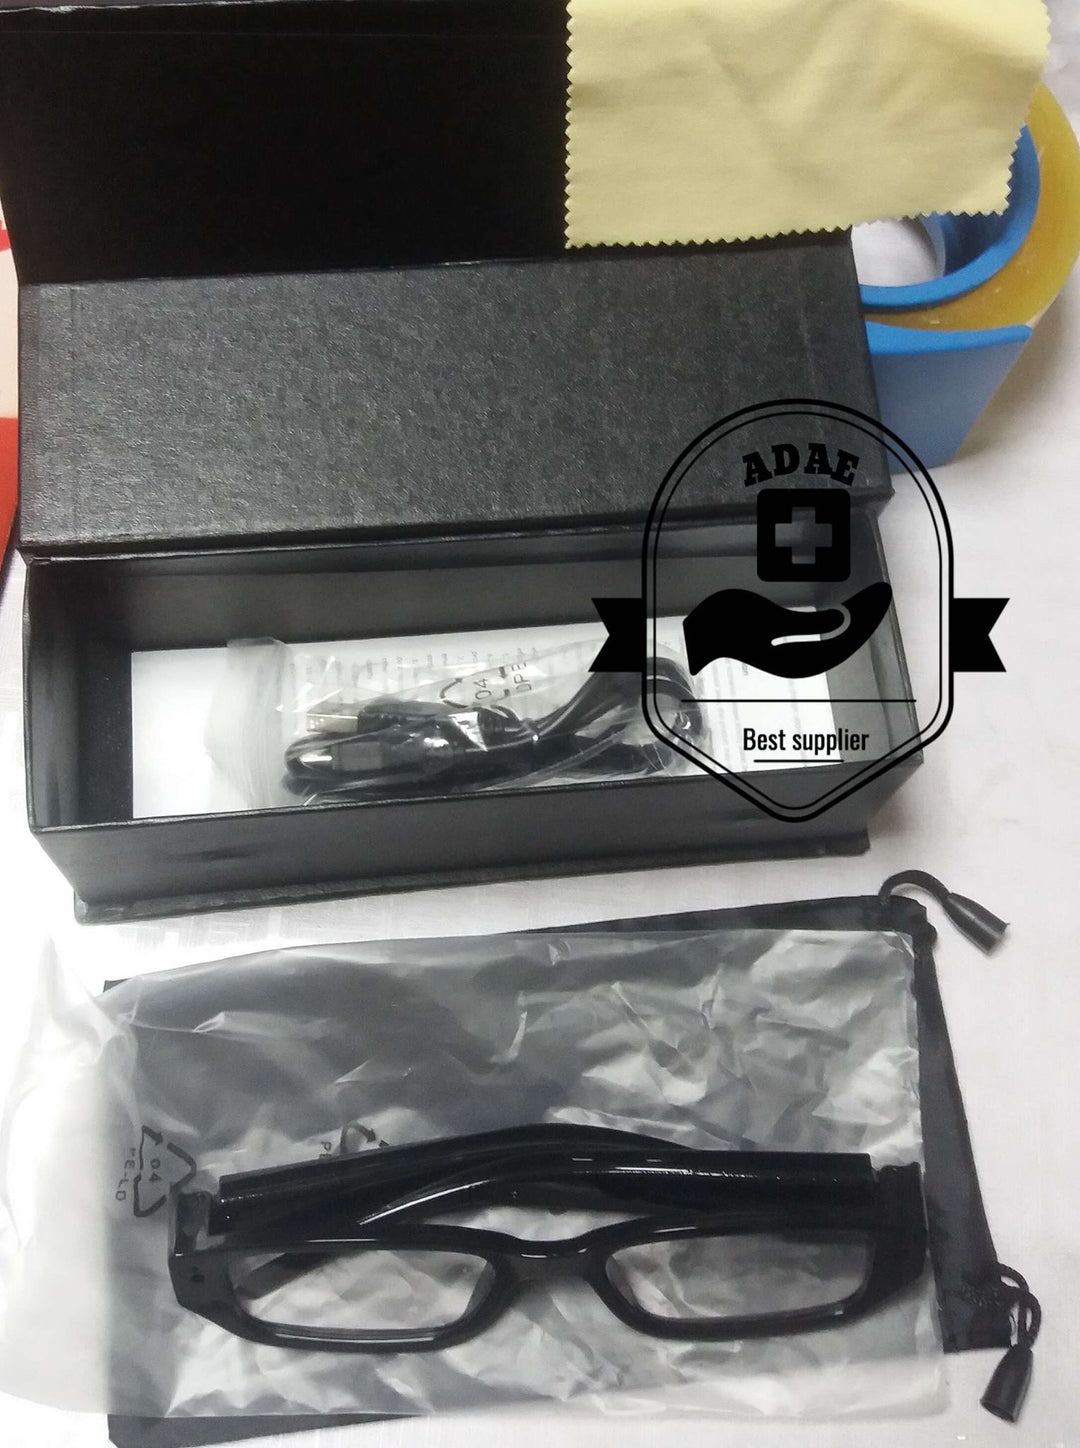 Glasses with bulletin Video camera 1080P - ADAE Dental Online Store